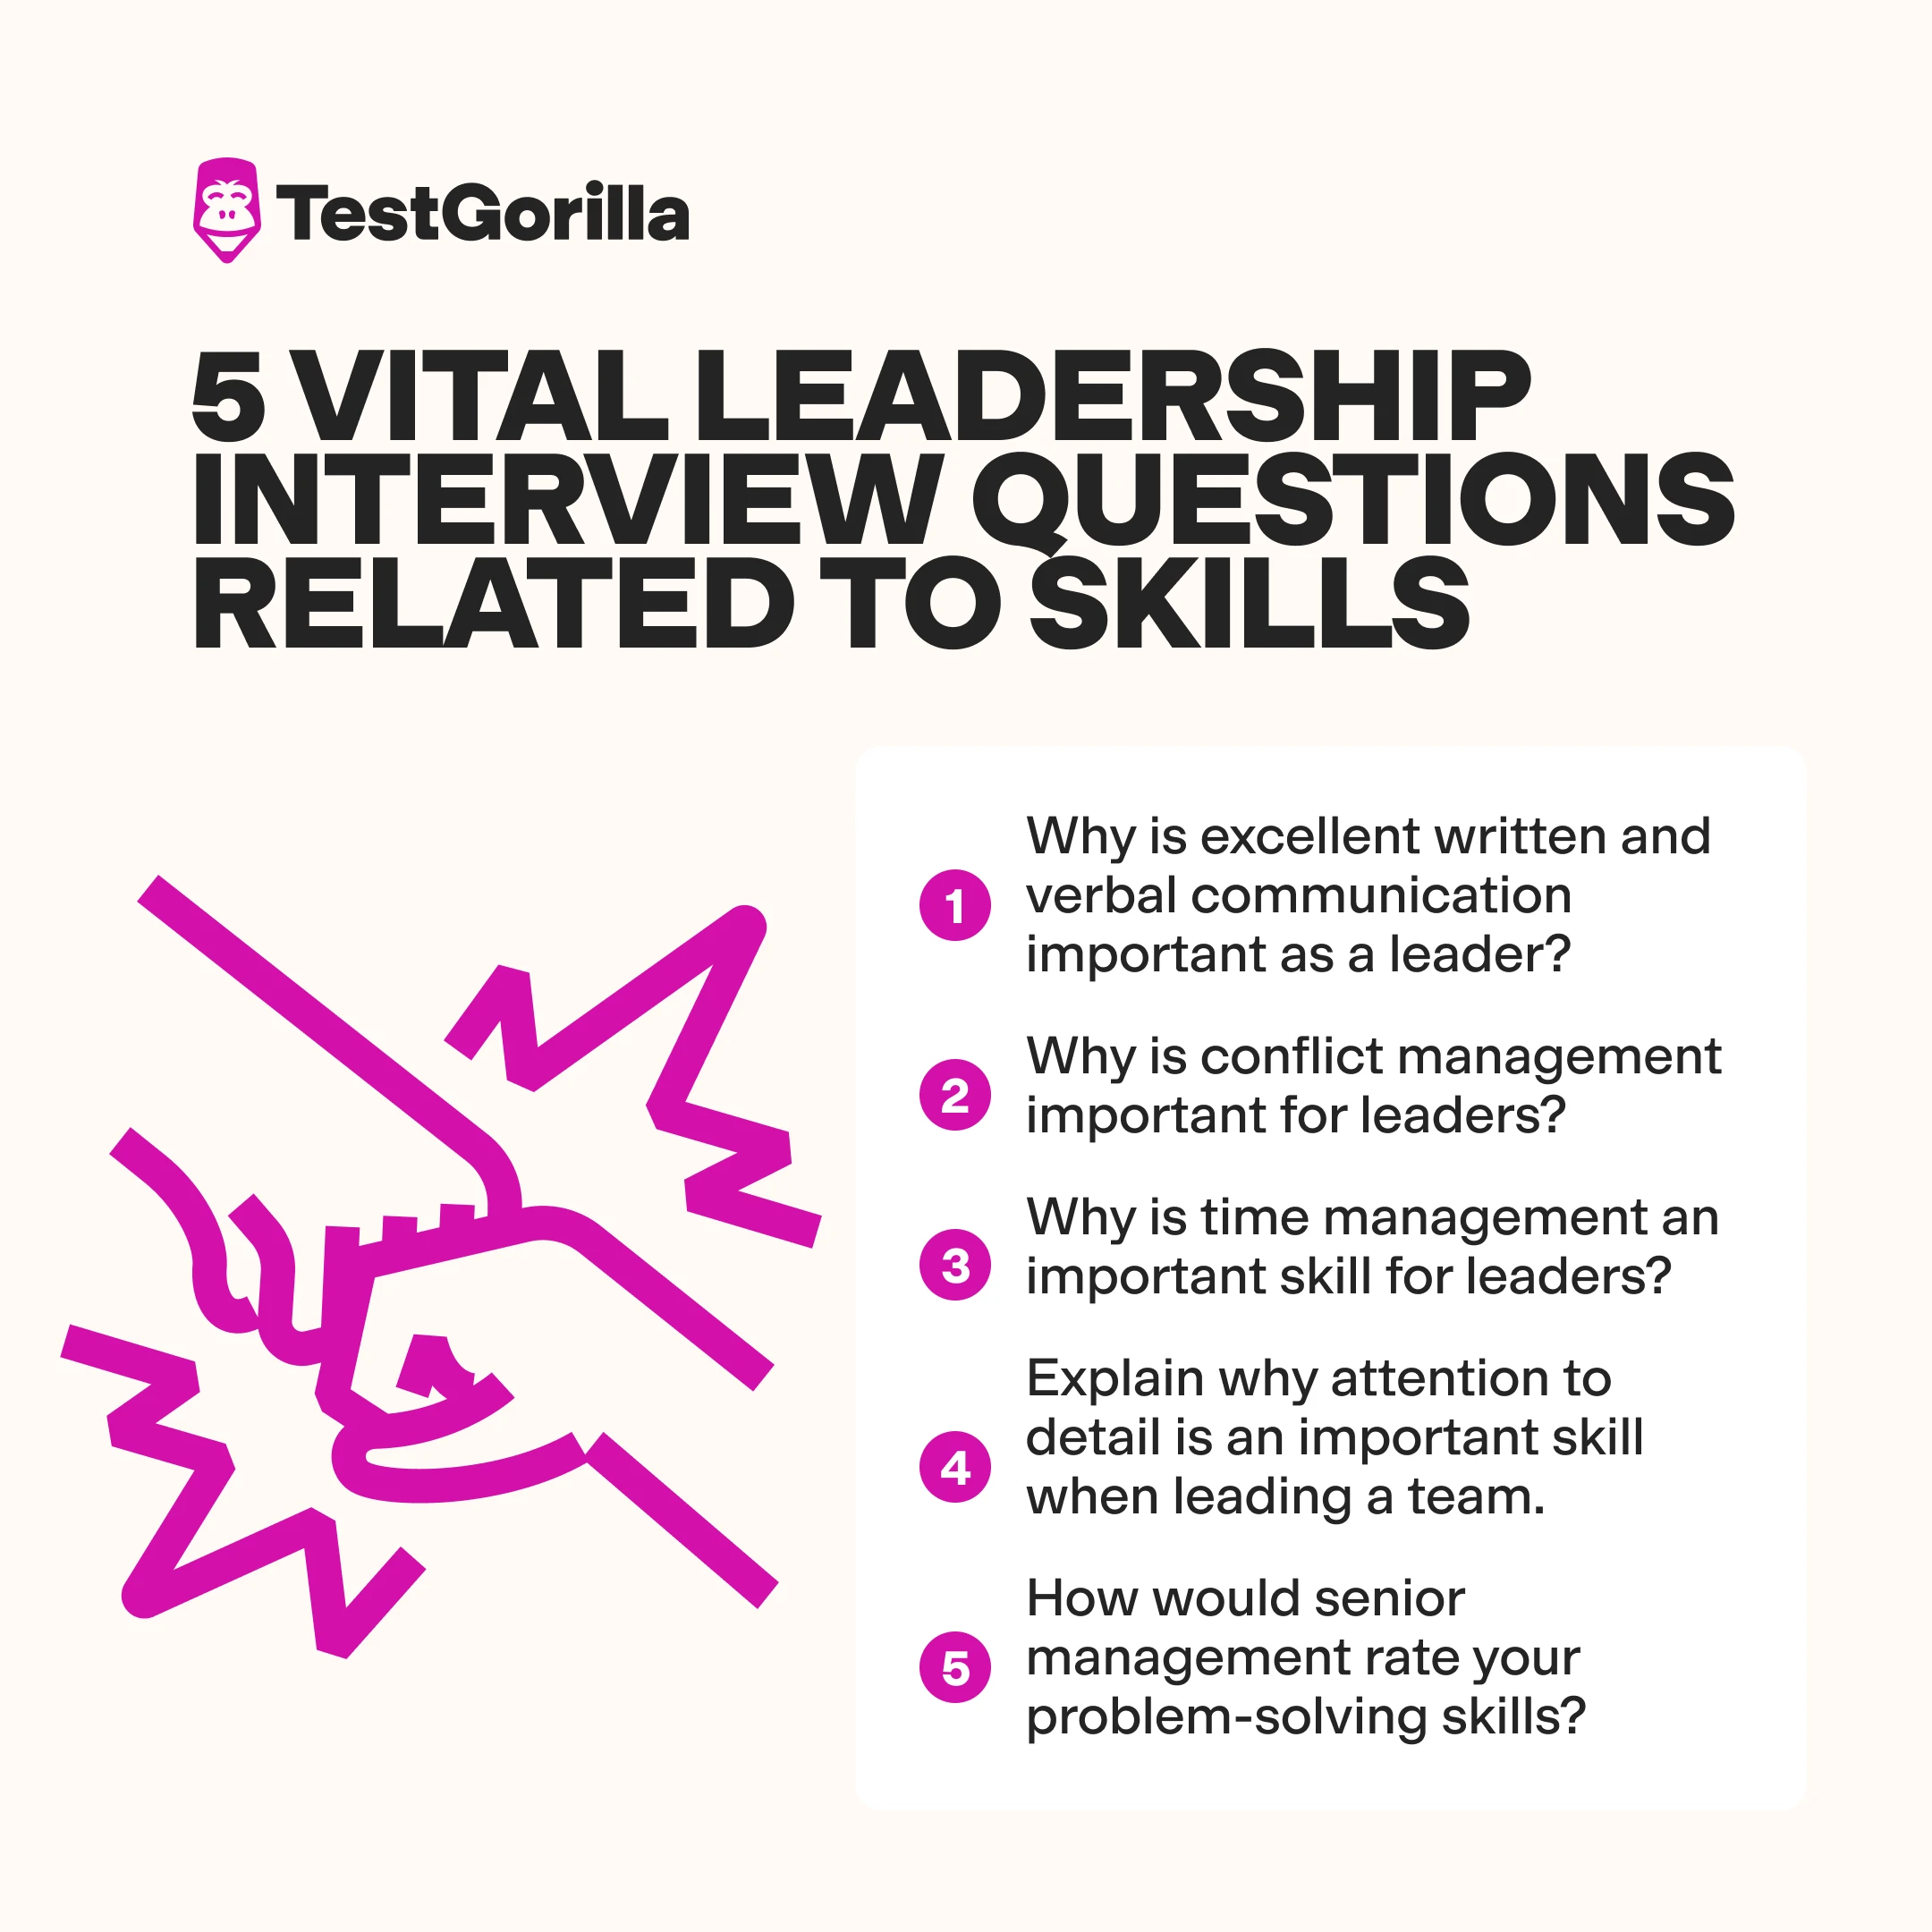 5 vital leadership interview questions related to skills